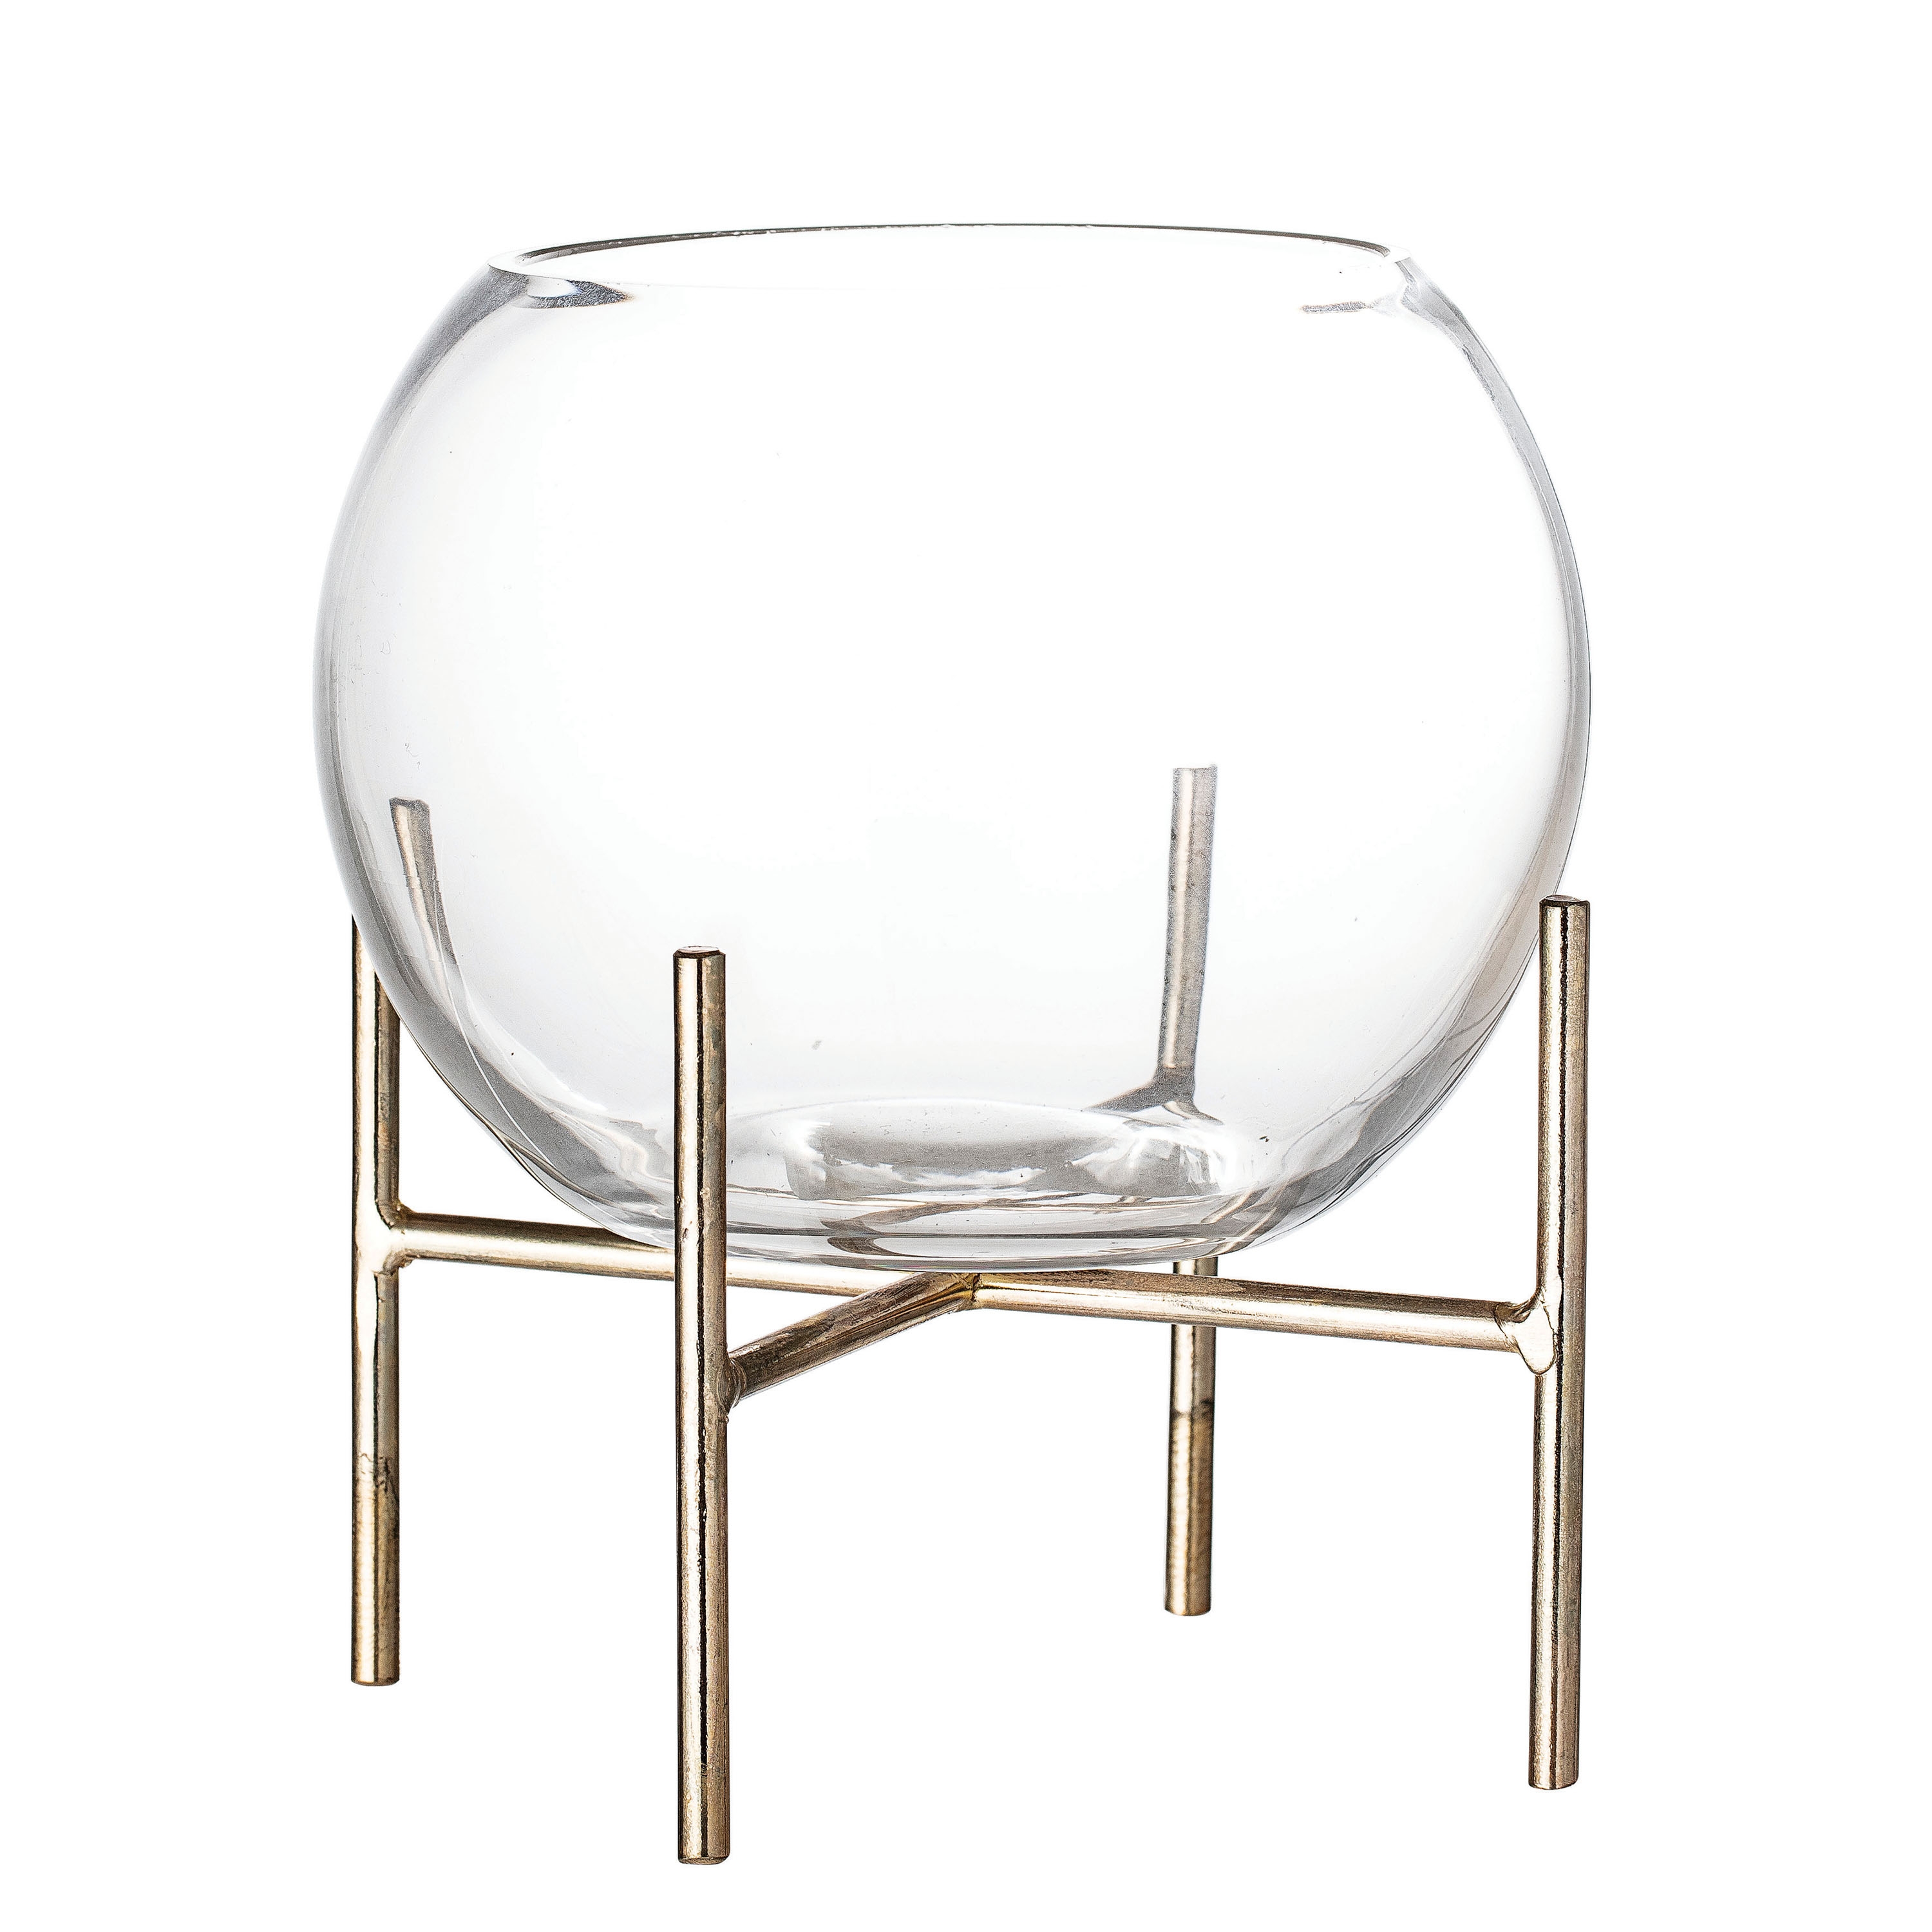 Clear Glass Ball Shaped Vase on Gold Metal Holder (Set of 2 Pieces) - Image 0